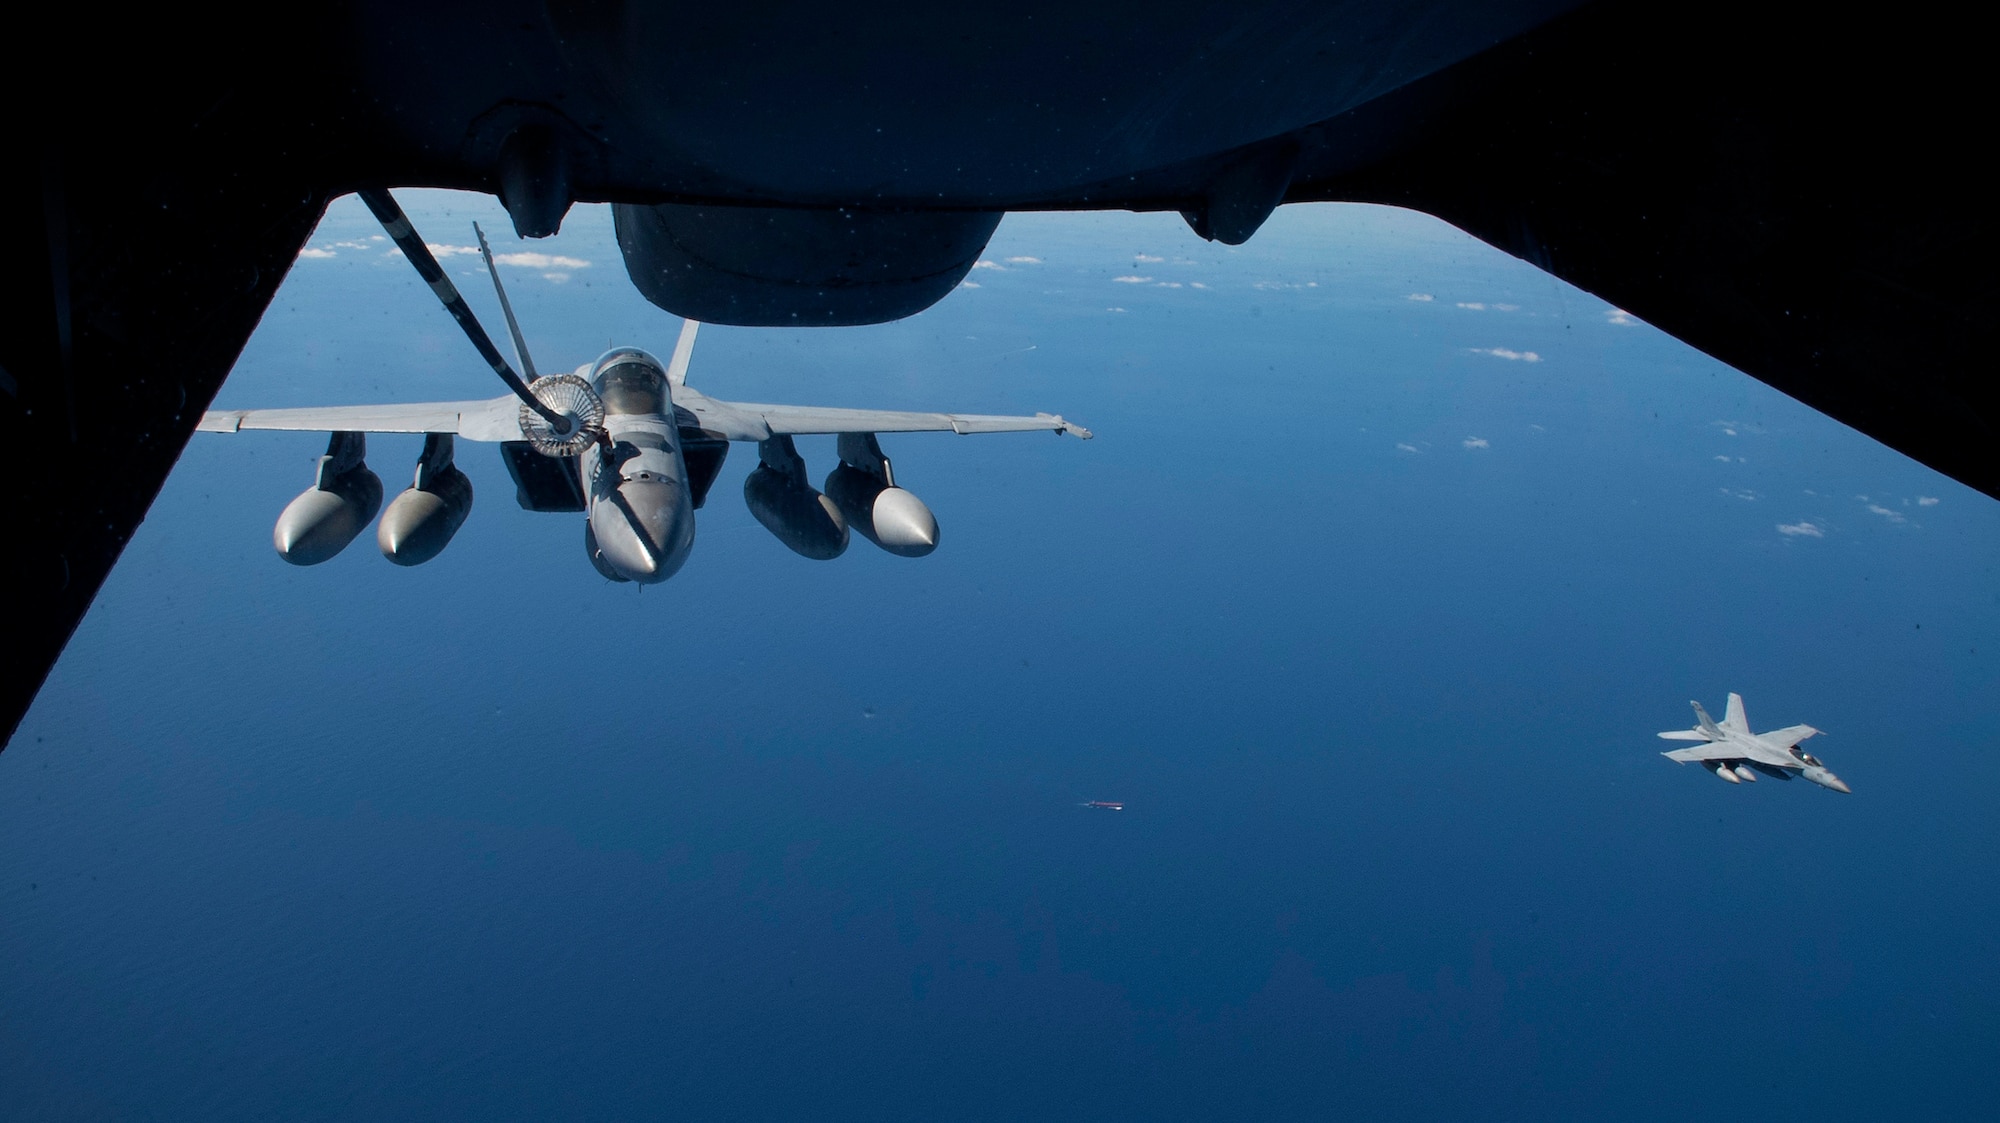 A U.S. Navy F/A-18 Super Hornet is refueled by a U.S. Air Force KC-10 Extender July 17, 2019 over the Pacific Ocean near the coast of Brisbane, Australia, in support of Exercise Talisman Sabre 19.